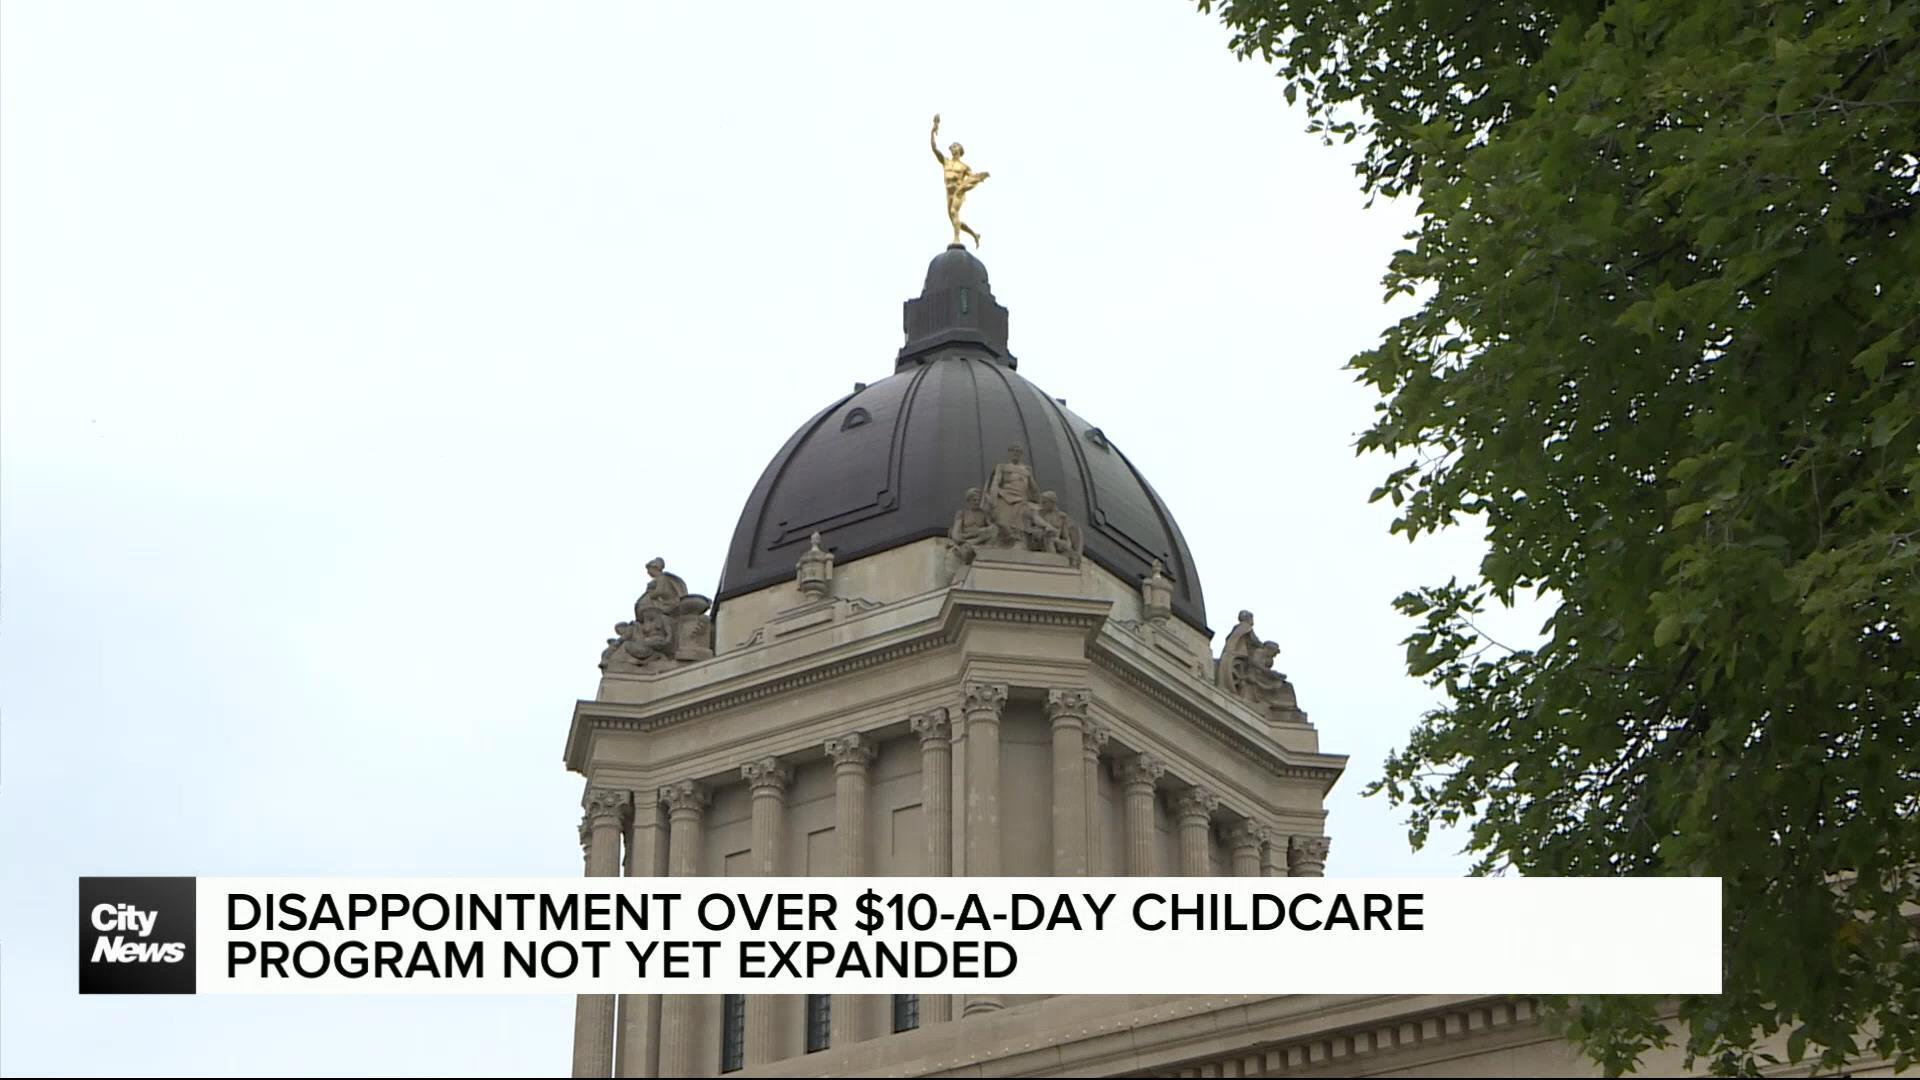 Disappointment over lack of $10-a-day daycare expansion